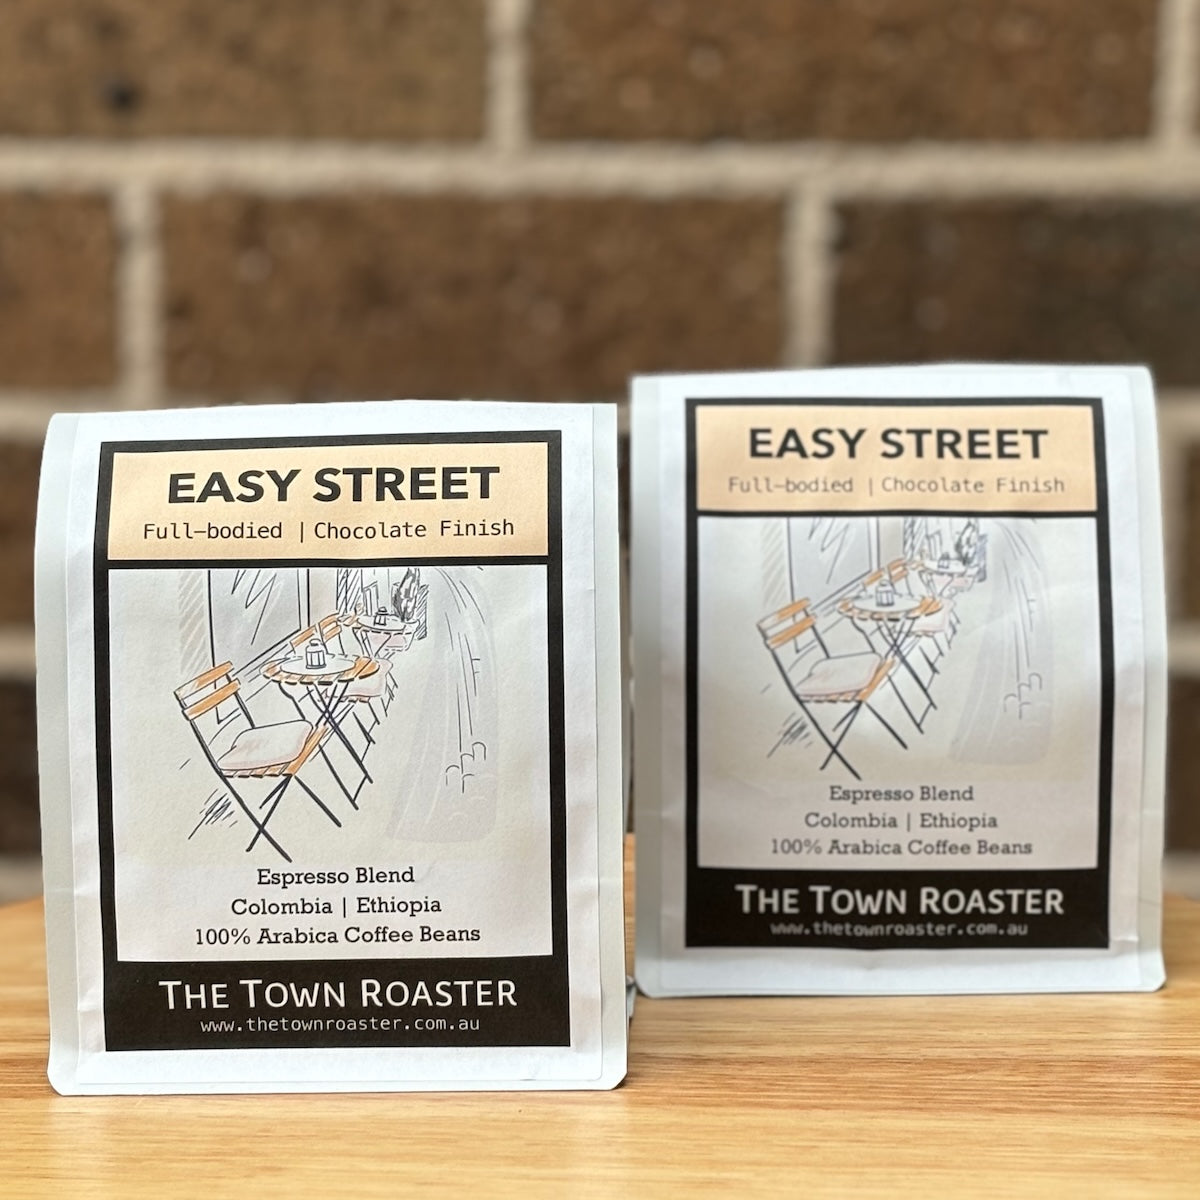 Prepaid Gift Subscription - Easy Street Coffee from The Town Roaster